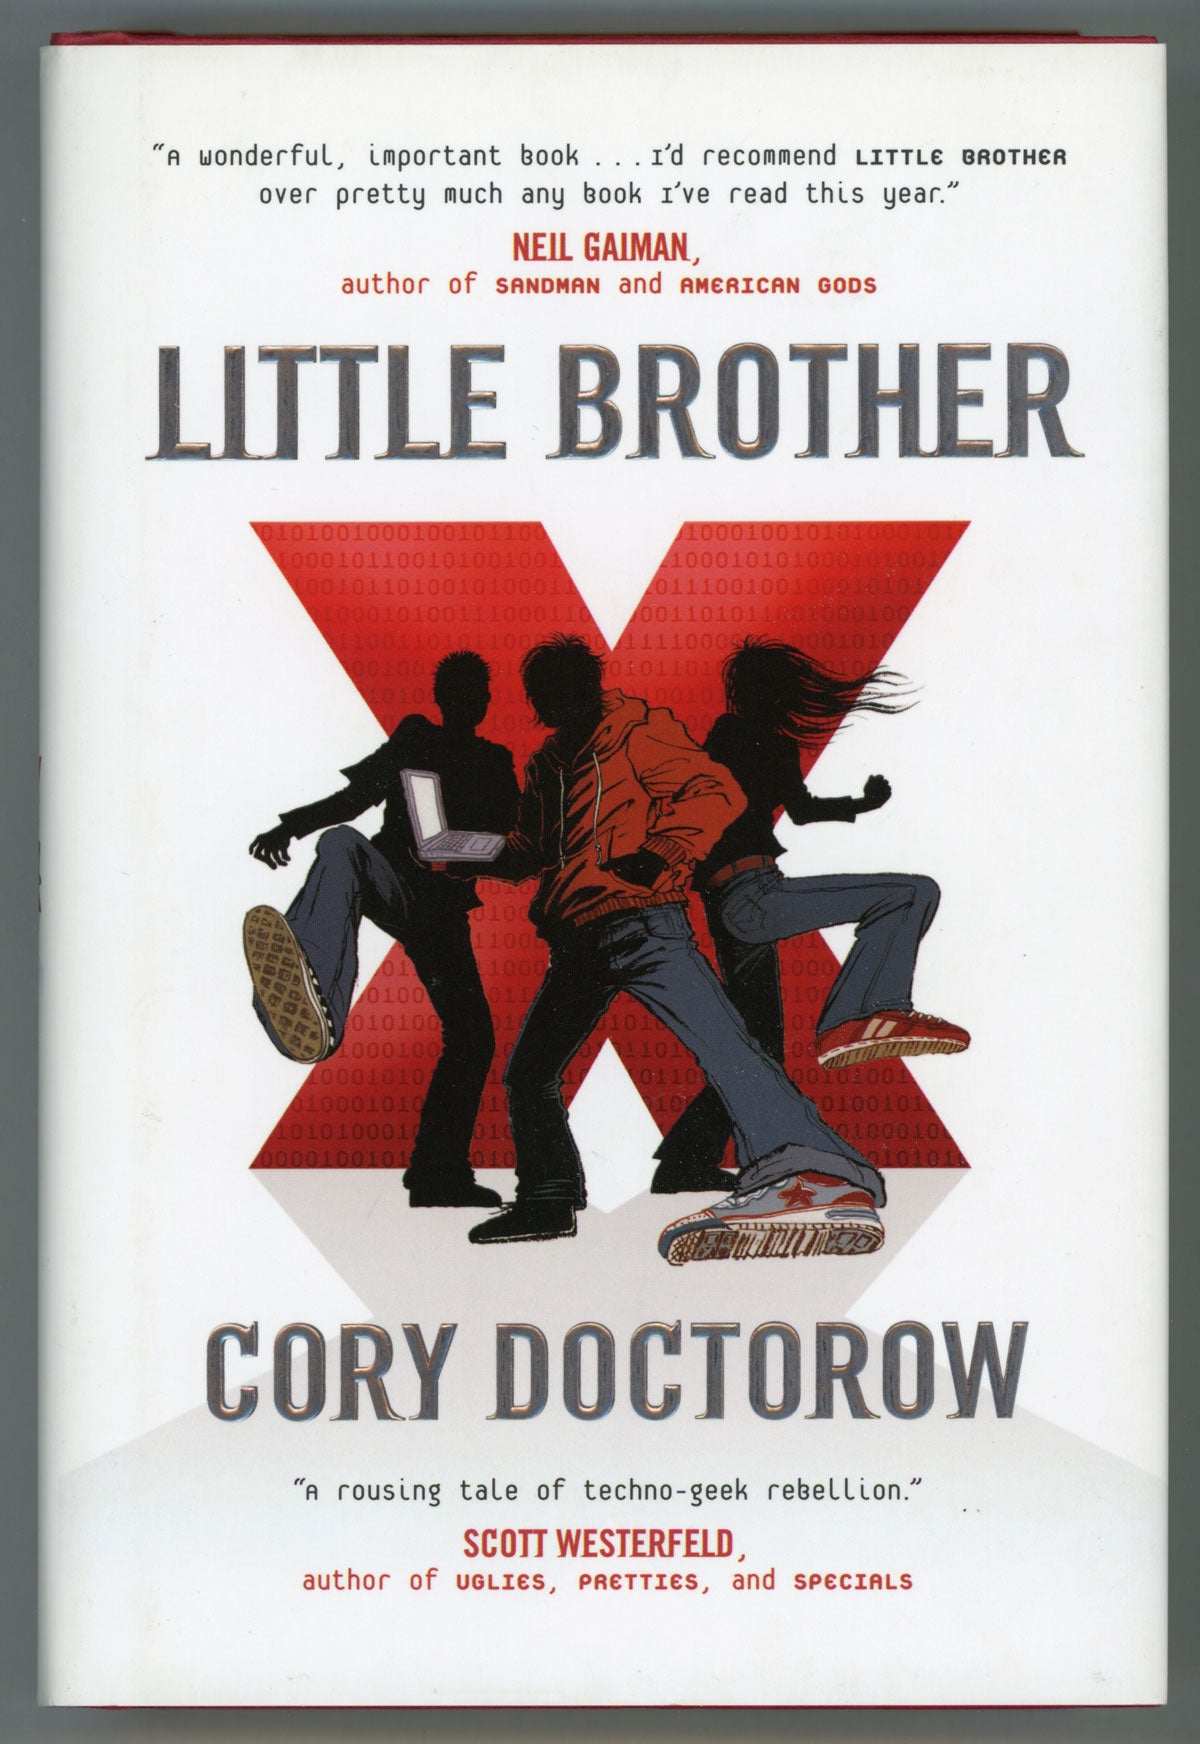 Little Brother book cover by Corey Doctorow